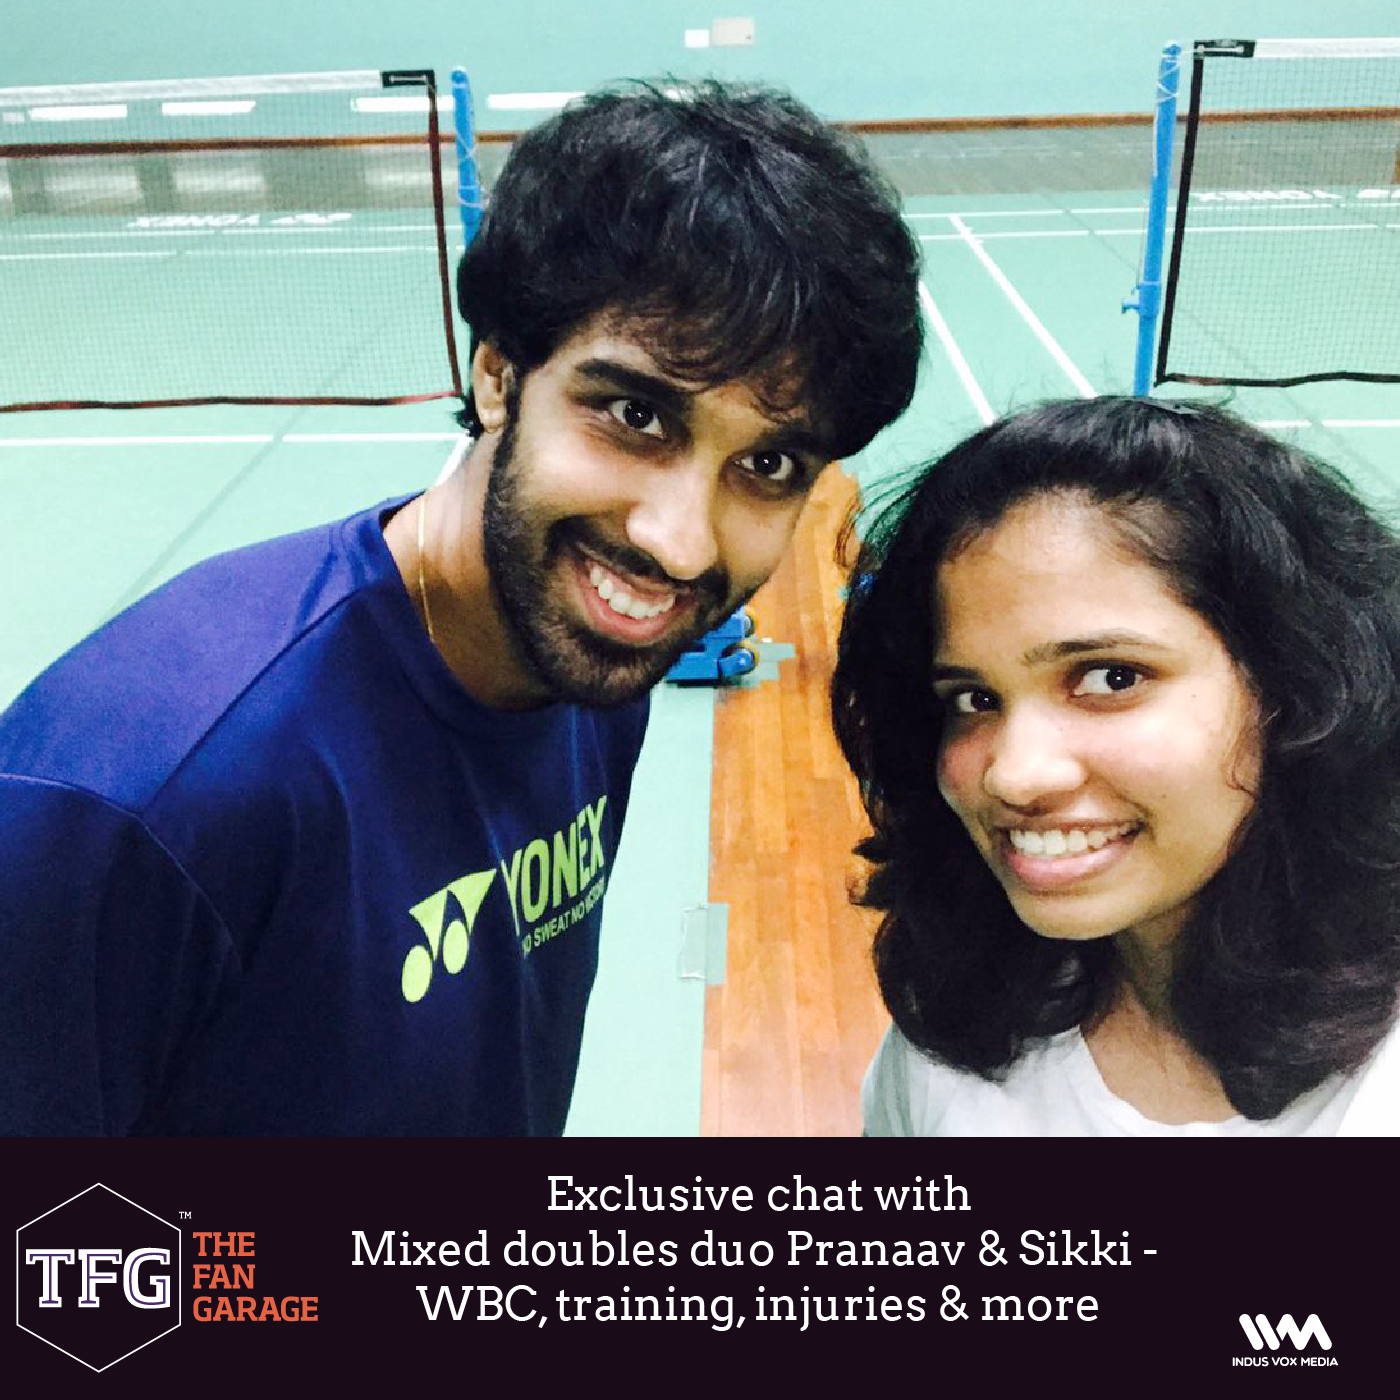 TFG interviews Ep. 024: Exclusive chat with Mixed doubles duo Pranaav & Sikki - WBC, training, injuries & more